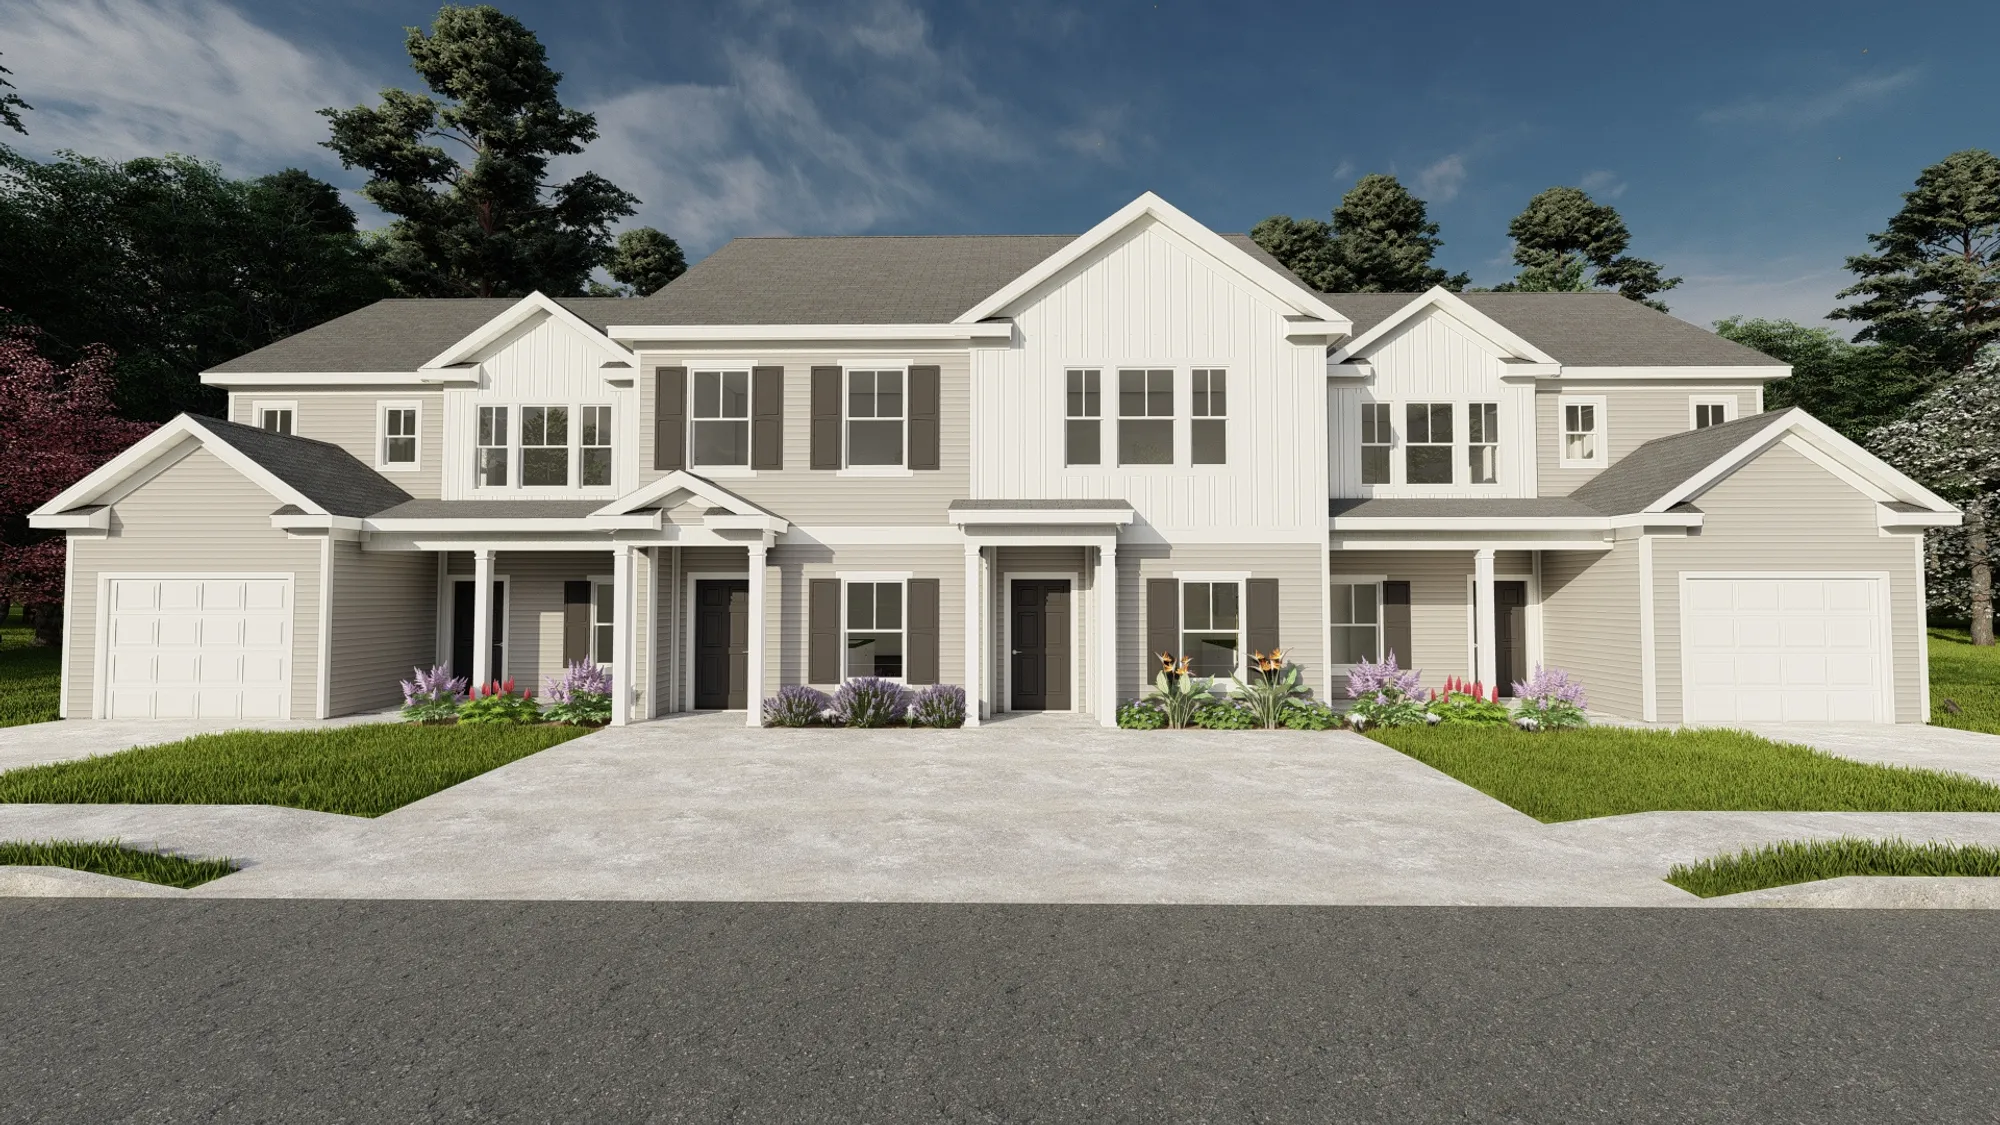 New townhomes are ready for immediate move-in in Caroleton, a community by Ivey Homes in Grovetown, GA 30813